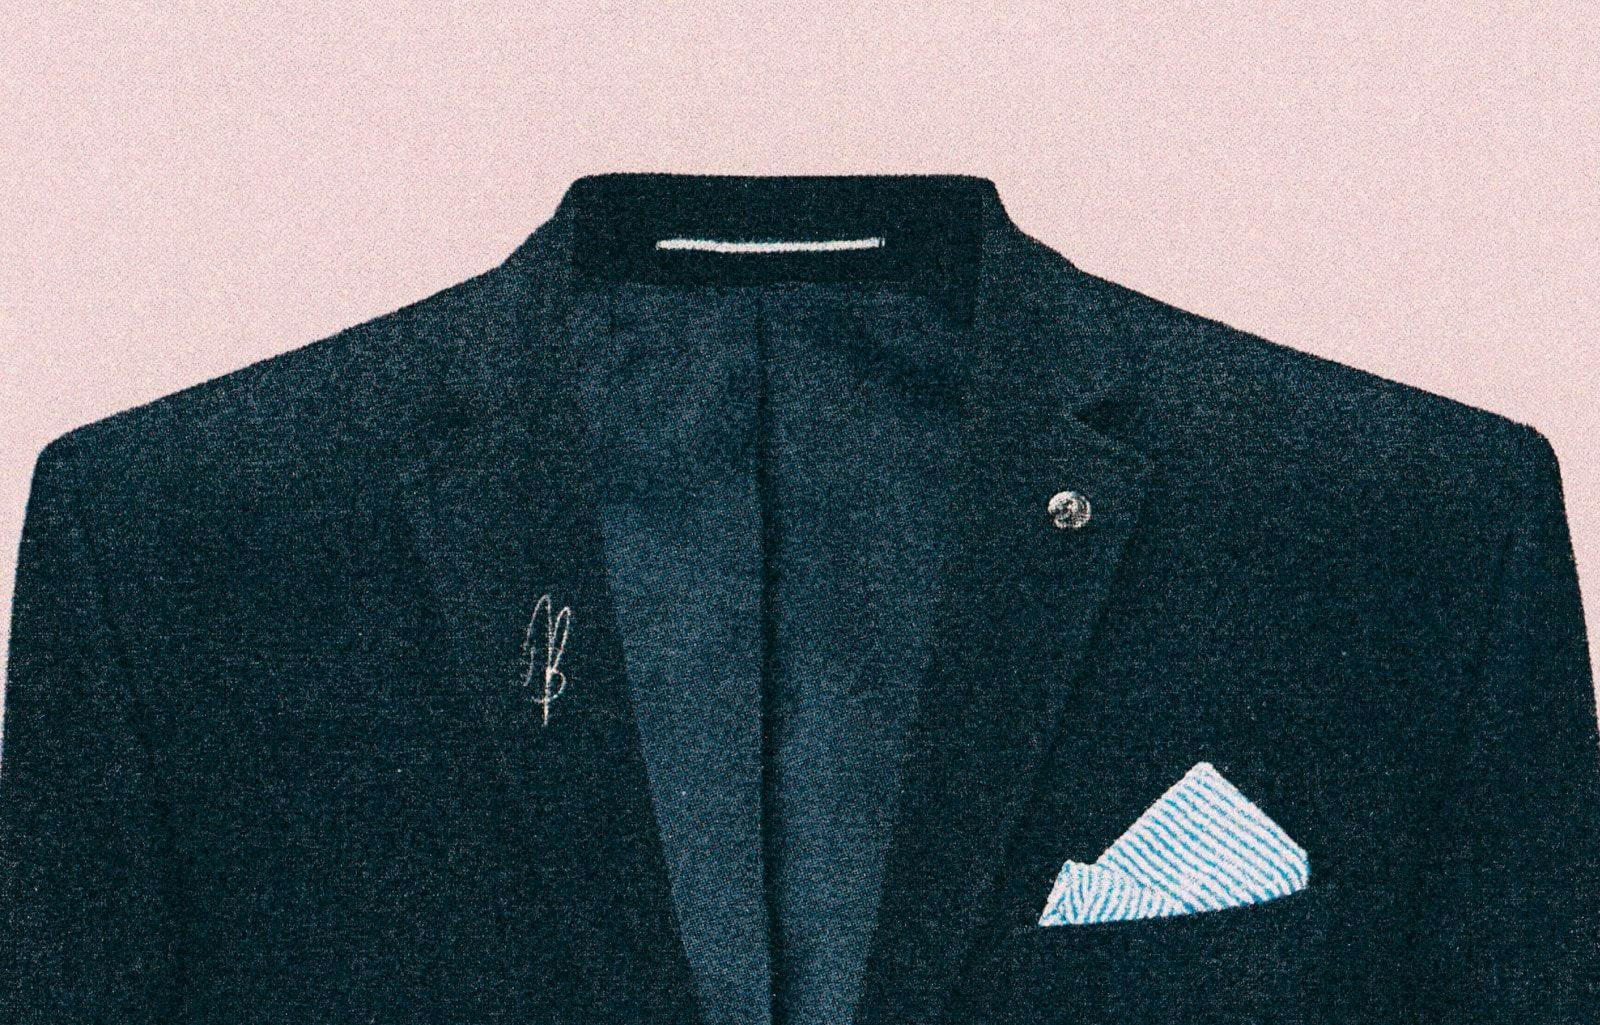 Suit with the letter B on it against a pink background